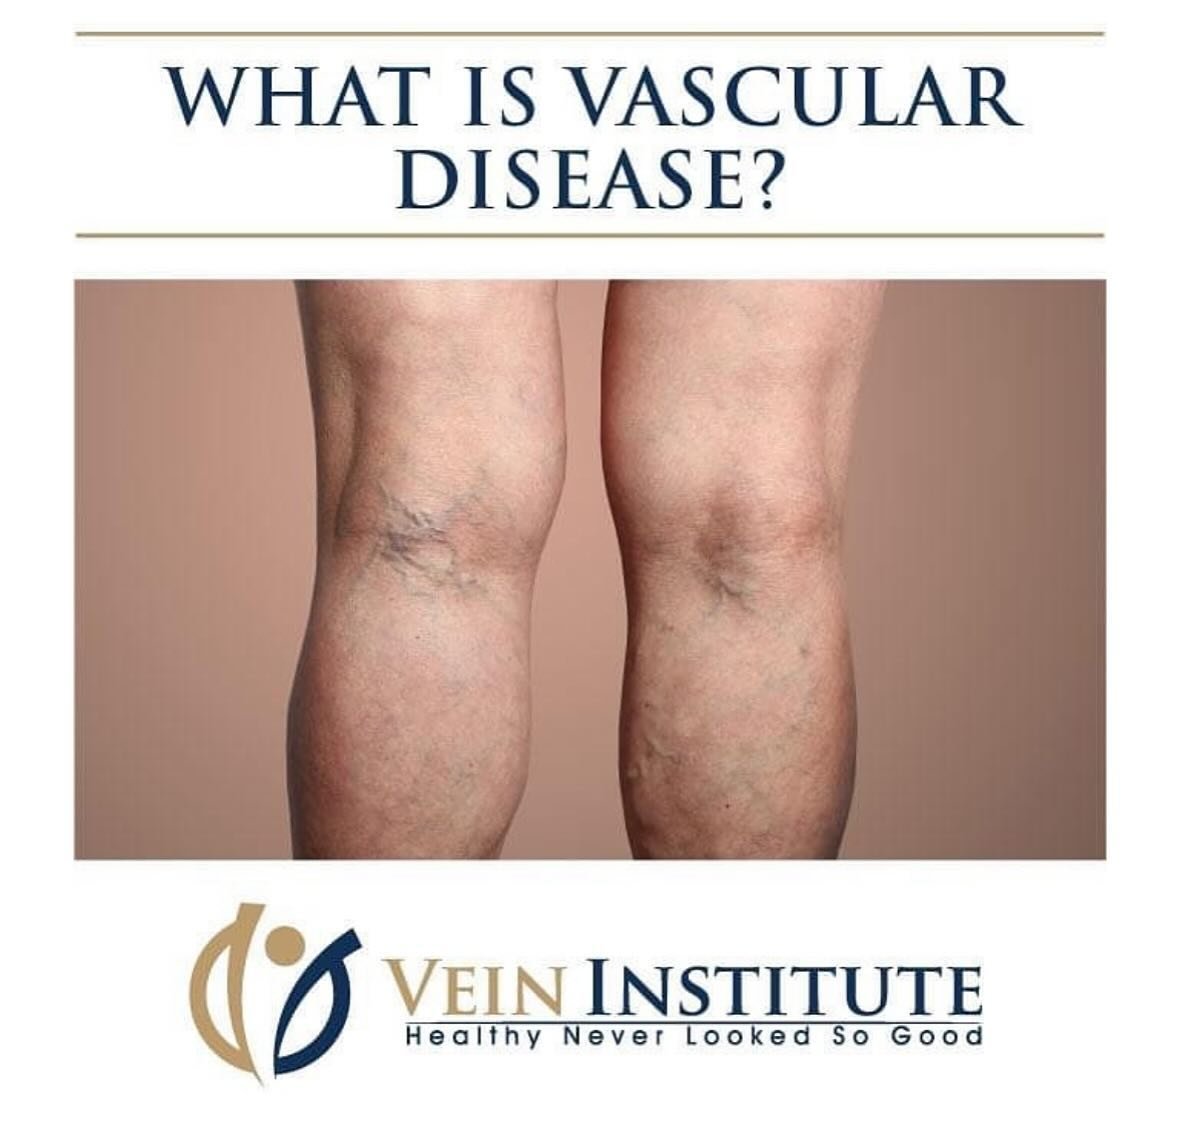 Vascular disease🩺 refers to any condition that affects your circulatory system - the vast network of arteries and veins in your body. Individuals of all ages, genders and races are at risk for developing vascular diseases but certain risk factors ca